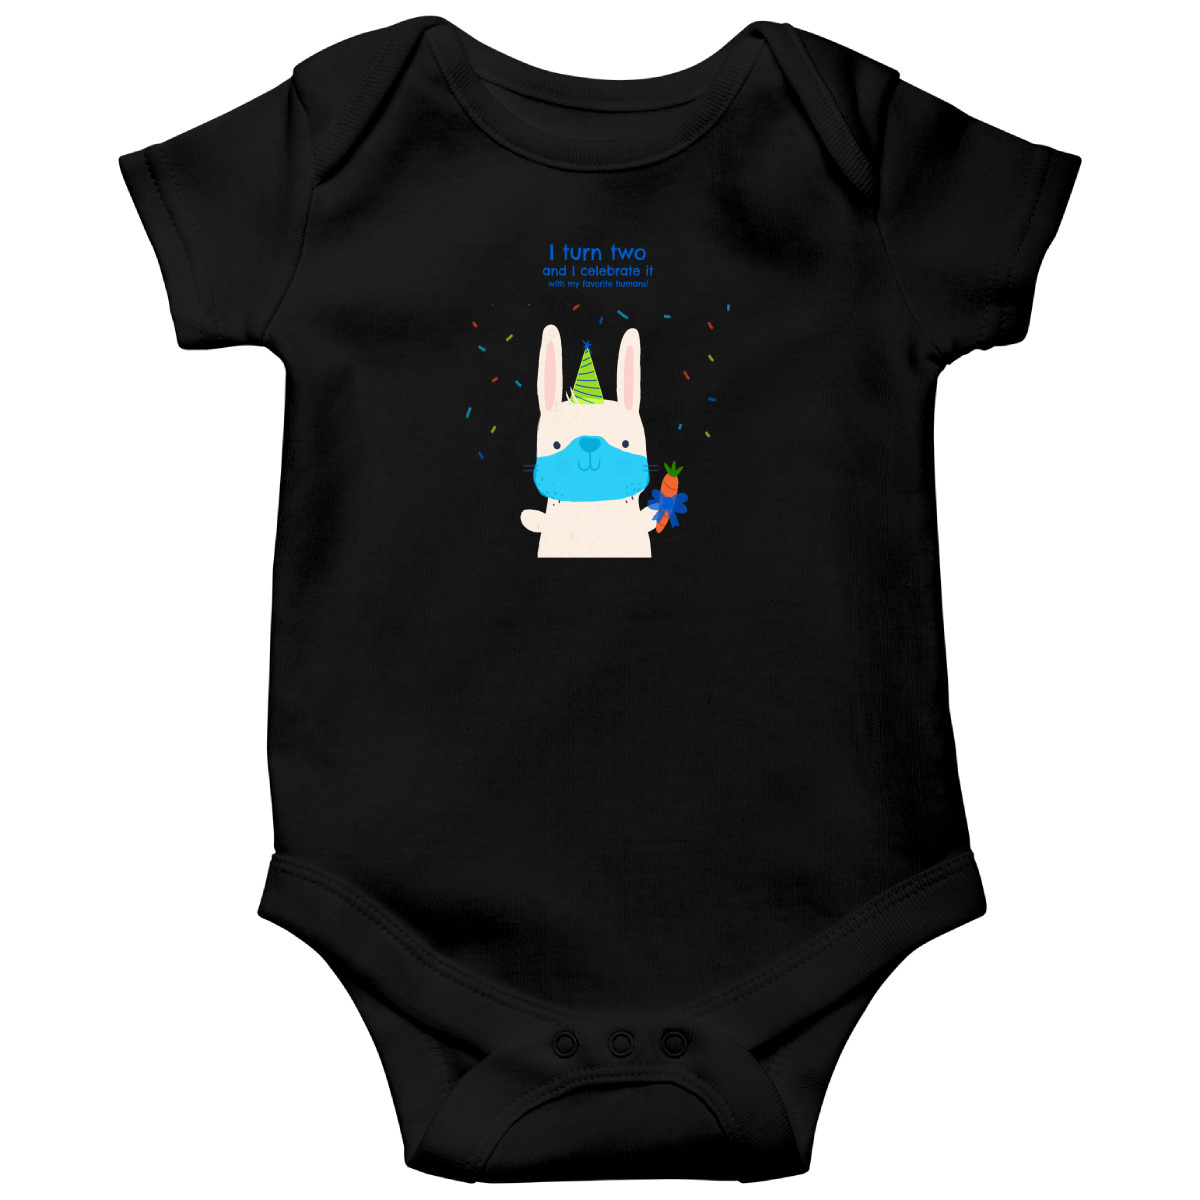 I turn two and I celebrate it with my favorite humans  Baby Bodysuits | Black